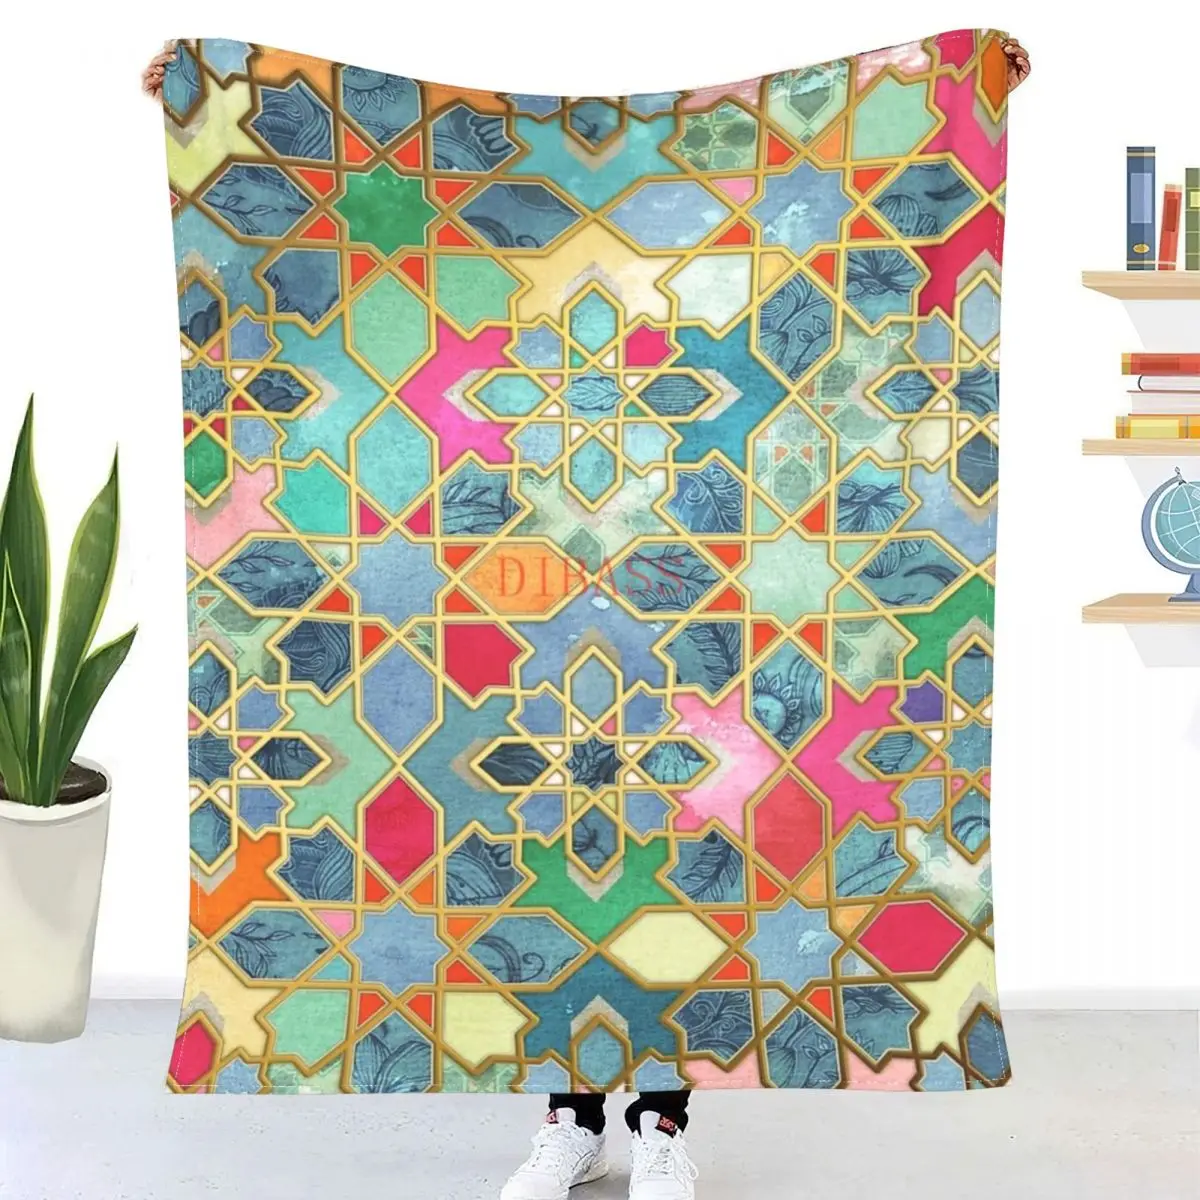 

Gilt Glory - Colorful Moroccan Mosaic 3D Printed Flannel Throw Blanket Bedspread Sofa blankets